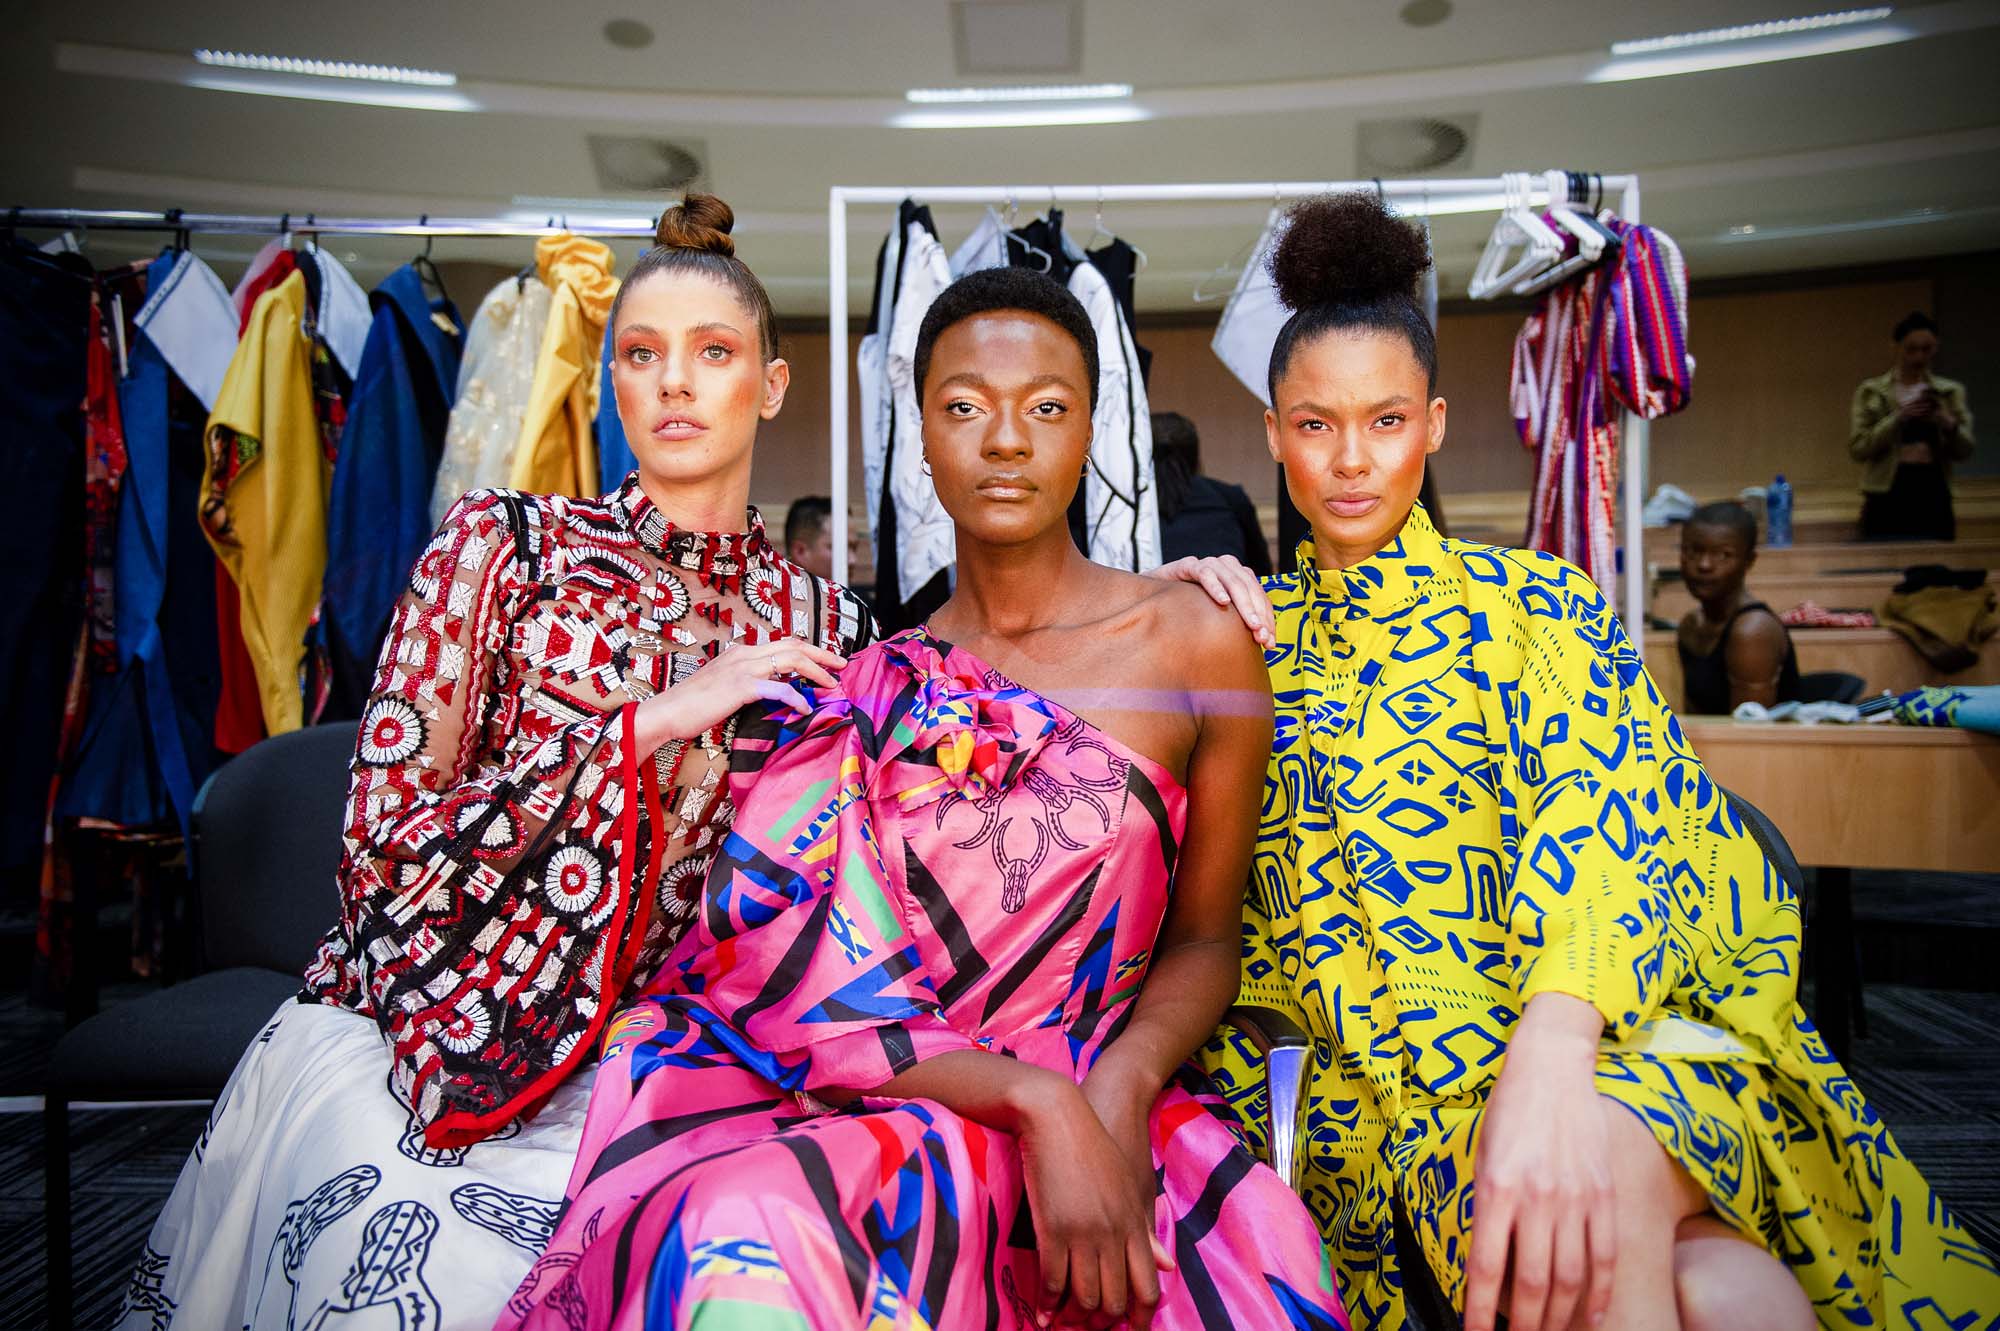 The 2022 SRC leadership held its Afrifund fashion fundraiser at the UCT GSB to raise funds for African International students in collaboration with Africa Fashion International. UCT Chancellor Dr Precious Moloi-Motsepe showed support by donating R3 Million to their fund. Photo Lerato Maduna.